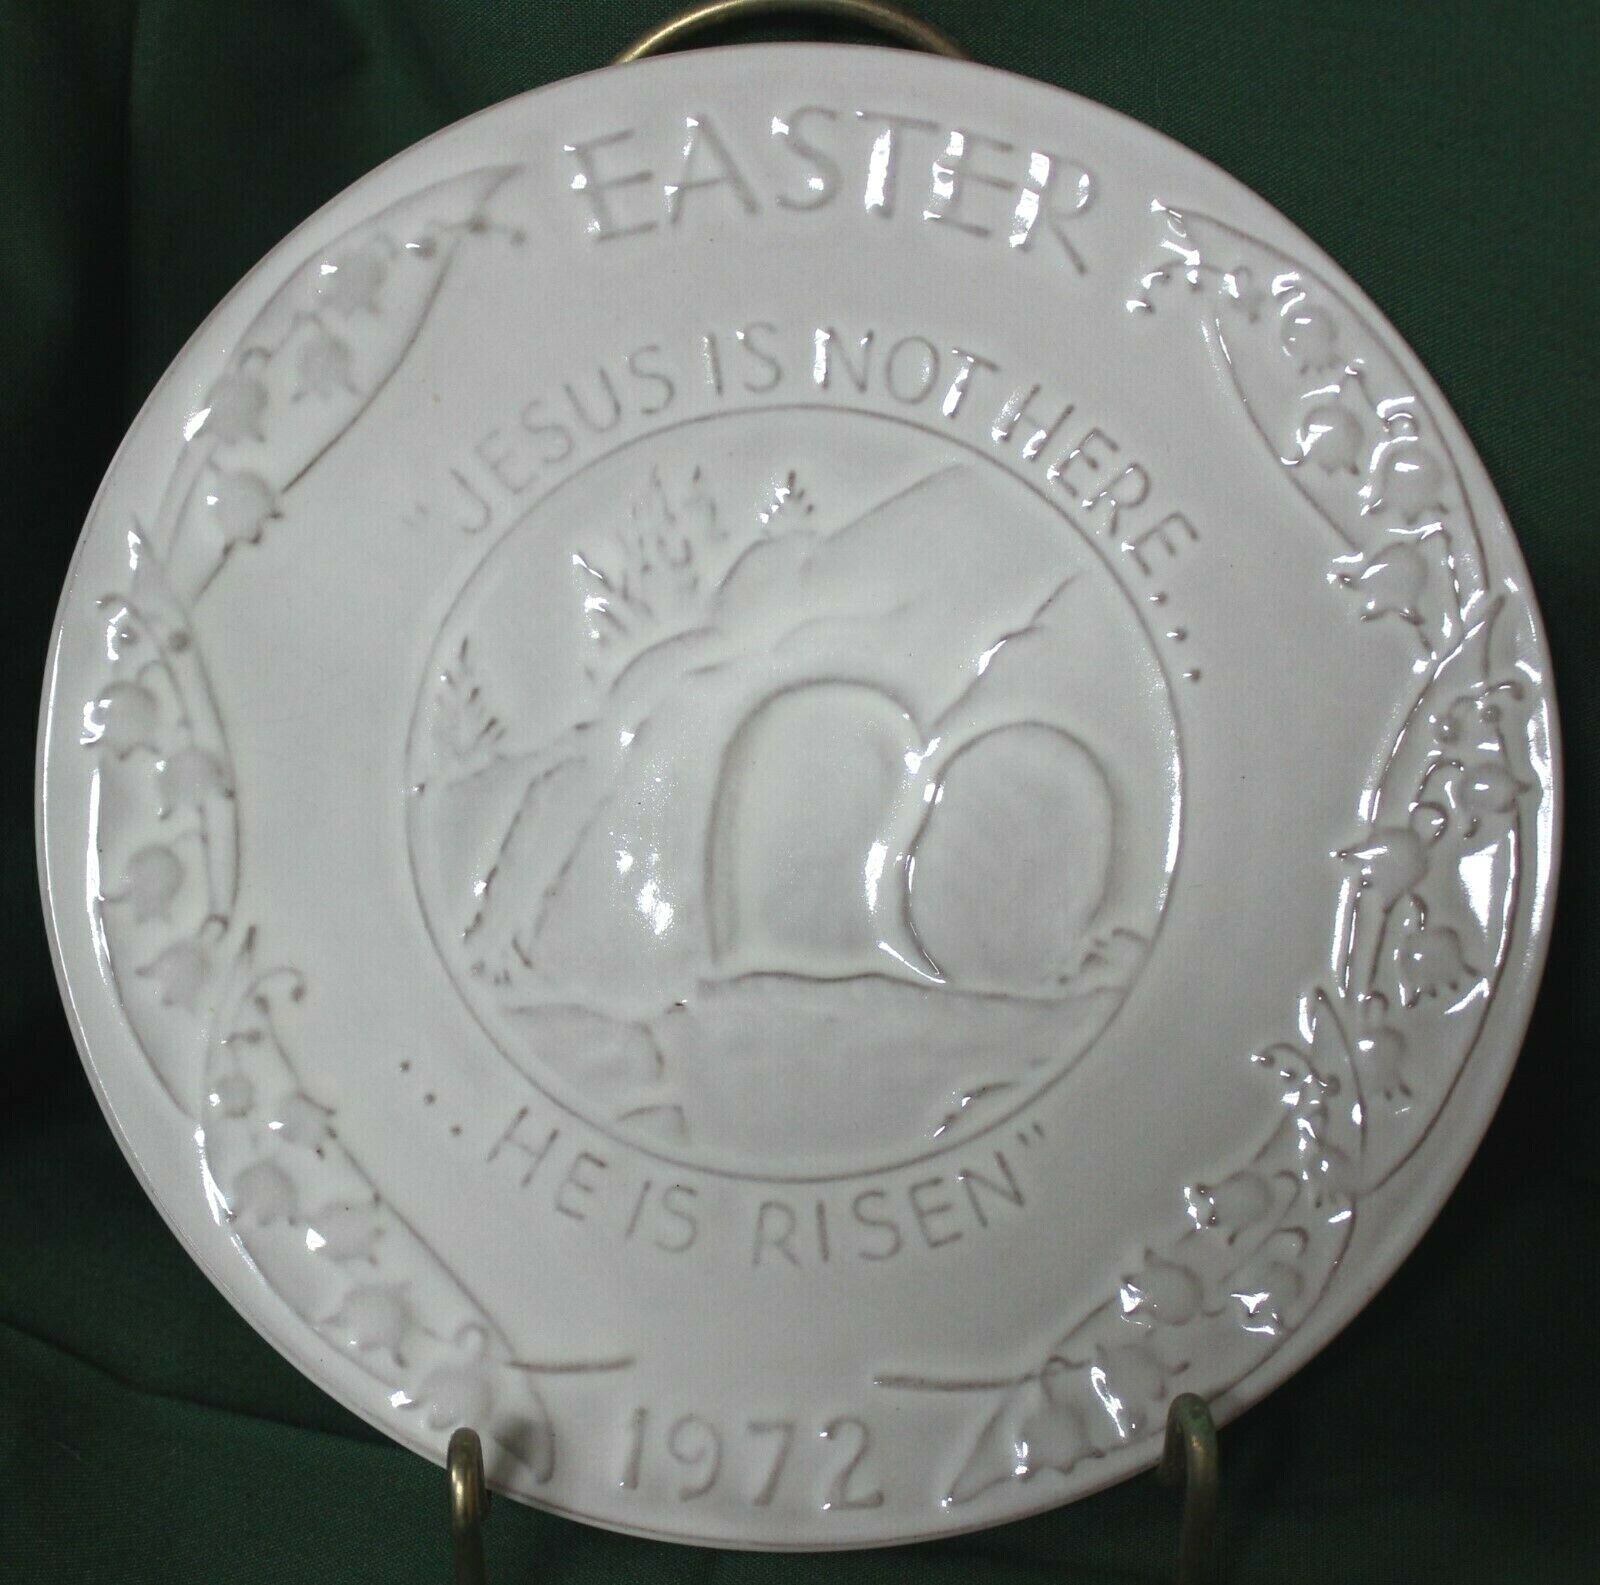 Primary image for 1972 Frankoma Oral Roberts Easter "Jesus Is Not Here He Is Risen" White Plate 